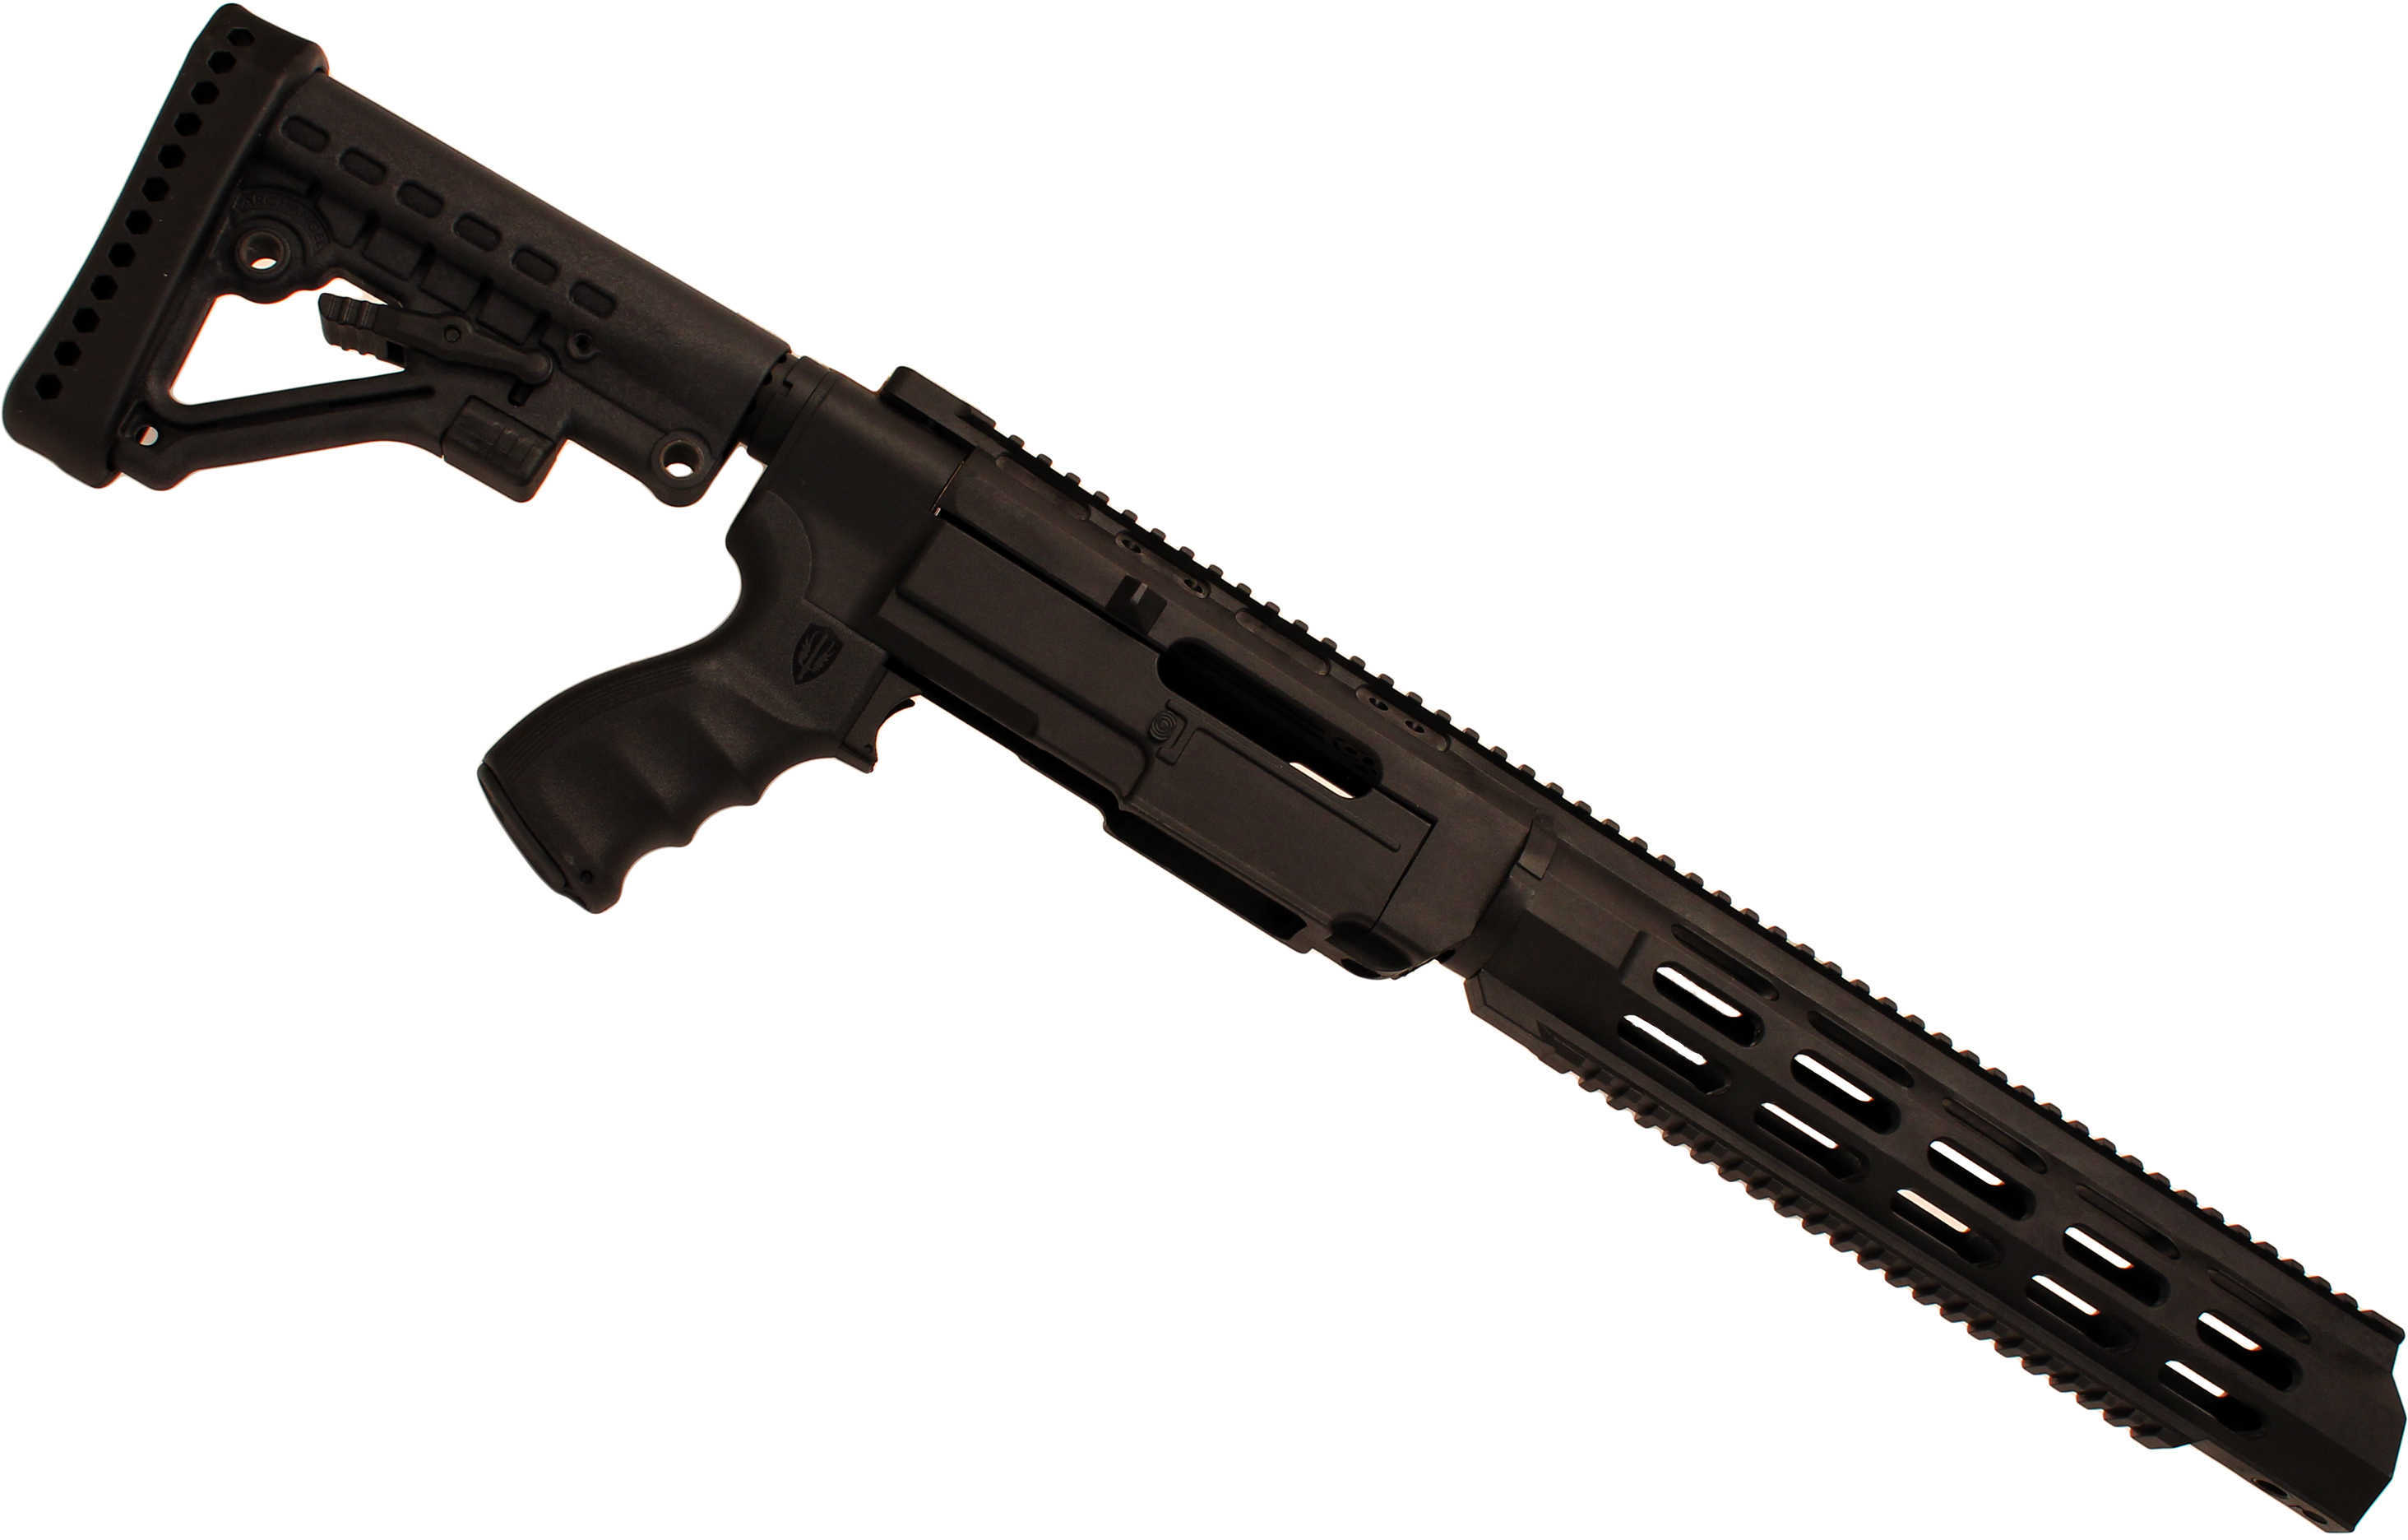 Promag Archangel 556 Conversion Stock, Black Finish, With Extended Length Monolithic Rail Forend, Fits 10/22 AA556R-Ex